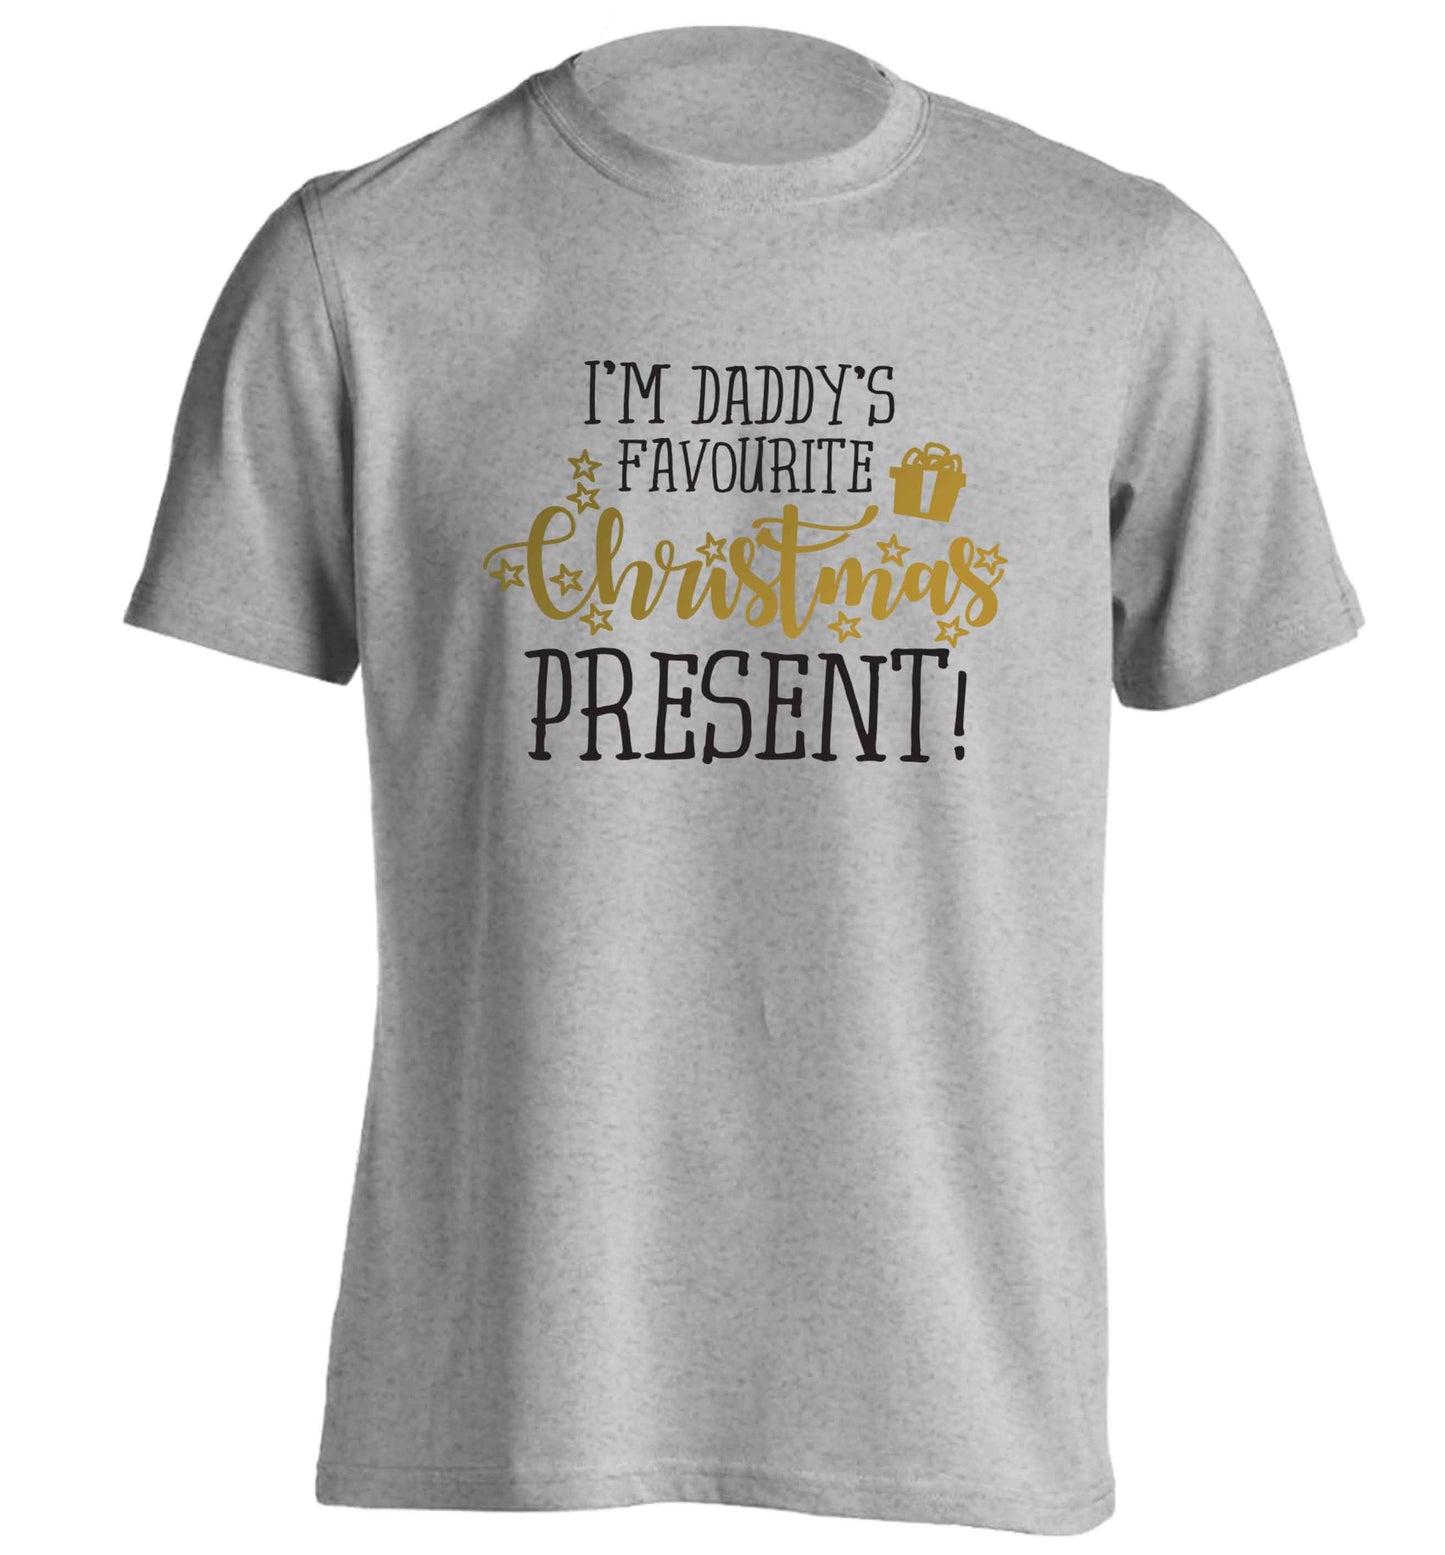 Daddy's favourite Christmas present adults unisex grey Tshirt 2XL